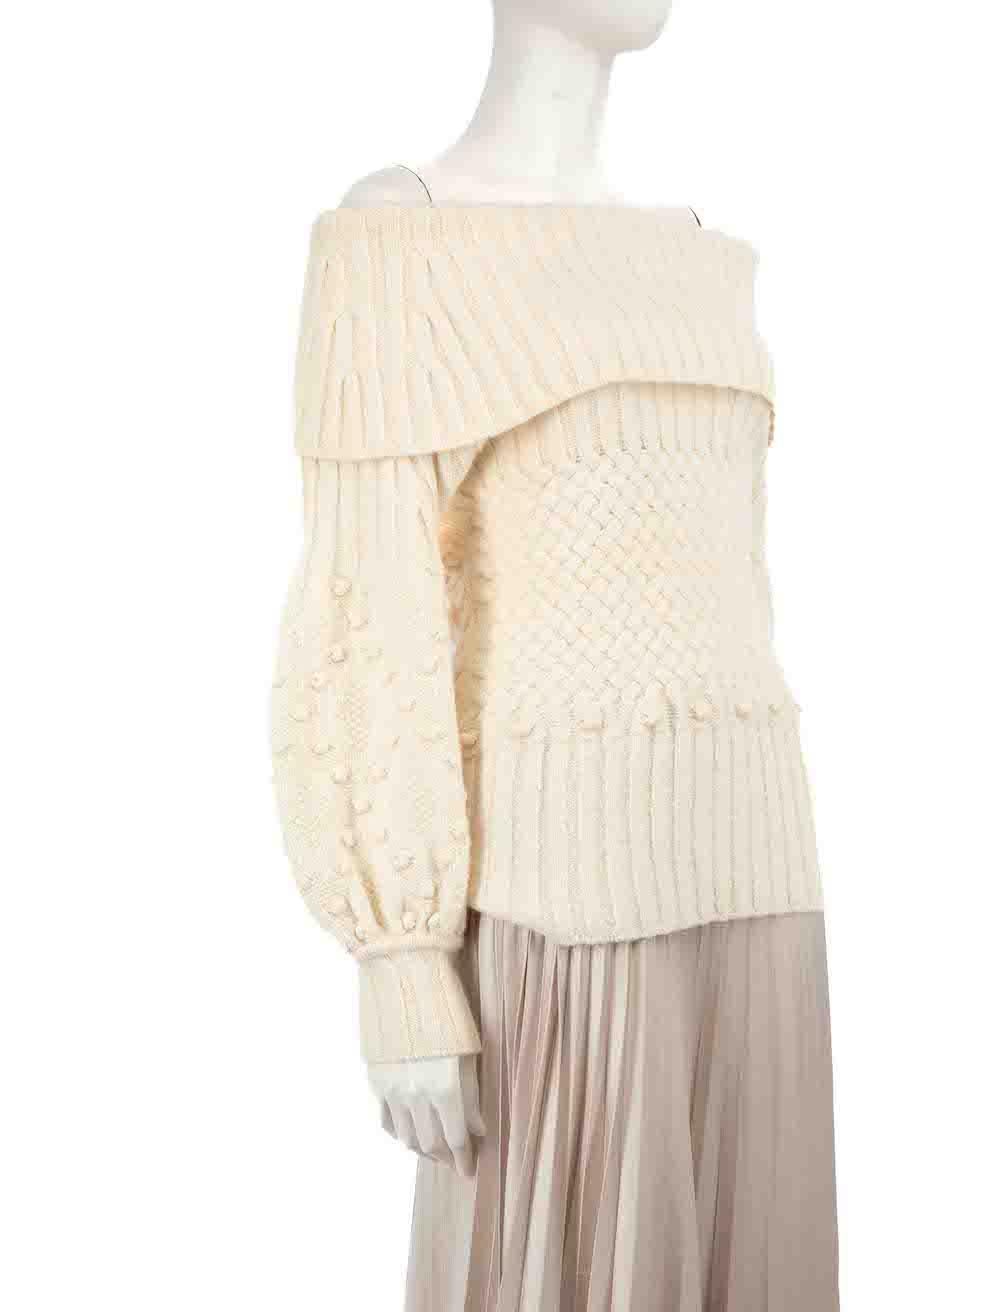 CONDITION is Very good. Hardly any visible wear to jumper is evident on this used Oscar de la Renta designer resale item.
 
 Details
 Ecru
 Wool
 Cable knit jumper
 Off Shoulder
 Long sleeves
 
 
 Made in Italy
 
 Composition
 68% Wool, 29%